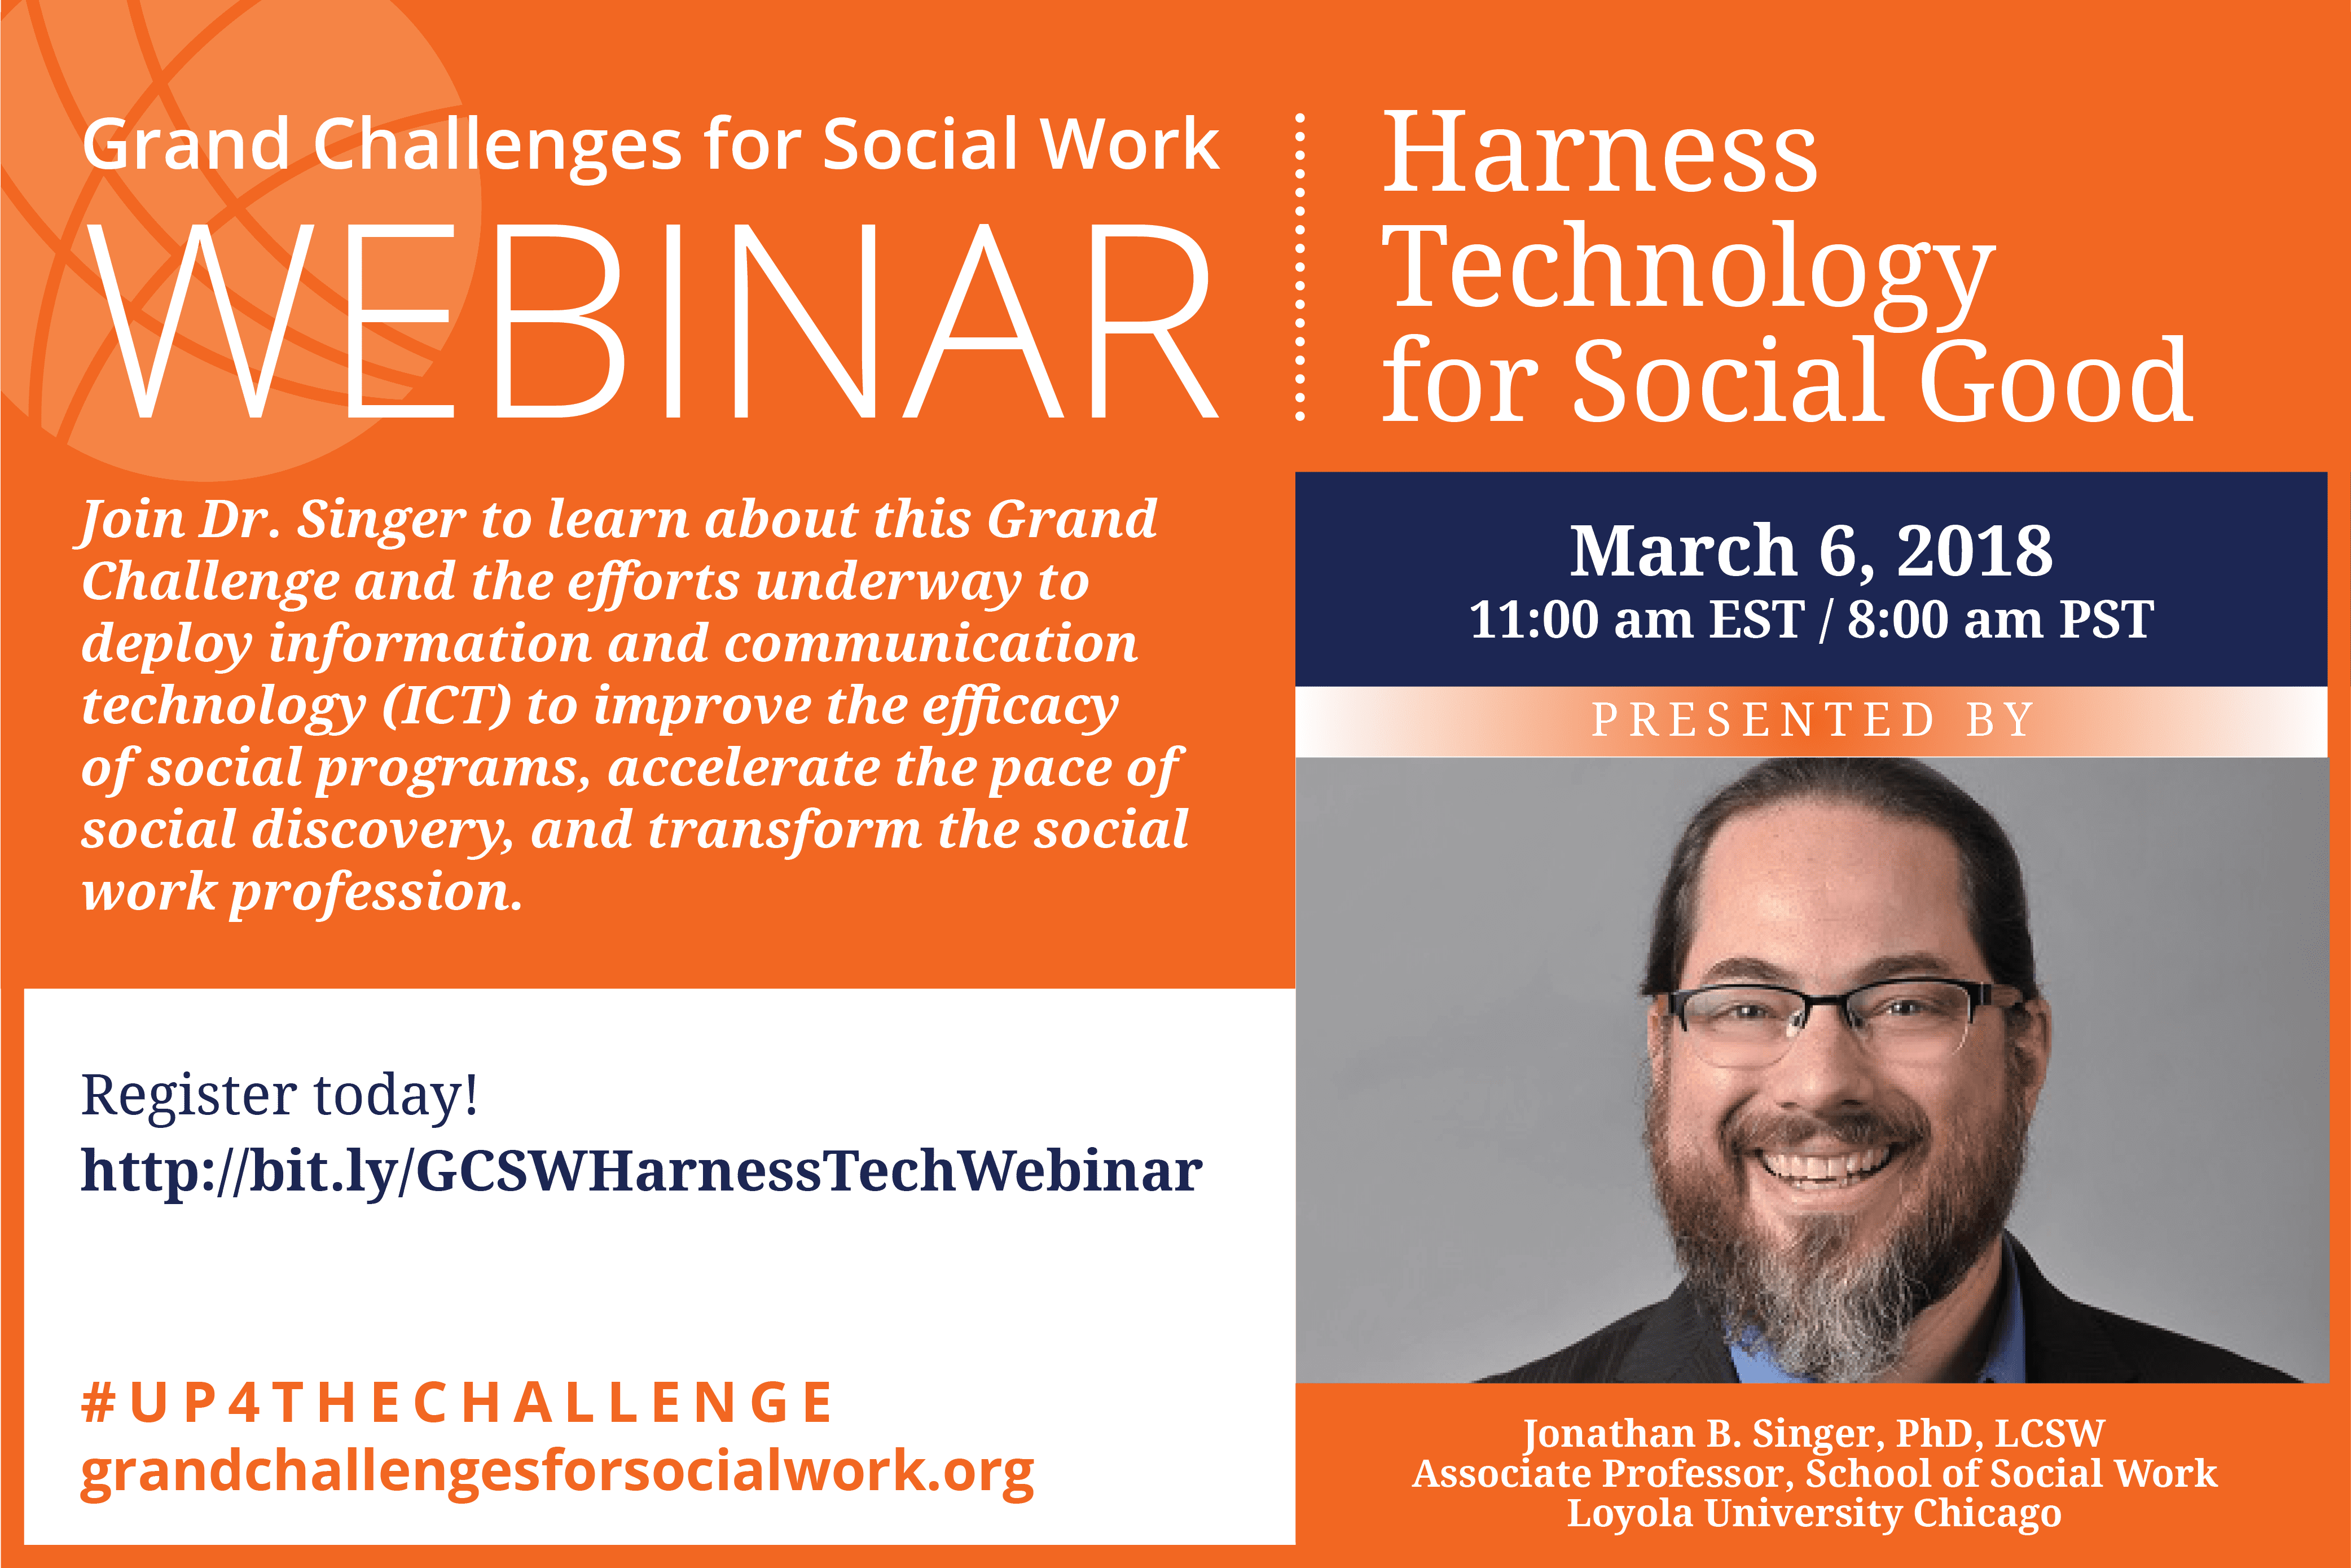 Join the Grand Challenges for Social Work Webinar, Harness Technology for  Social Good, on March 6, 2018, 11 am EST/ 10 am CST/ 8 am PST